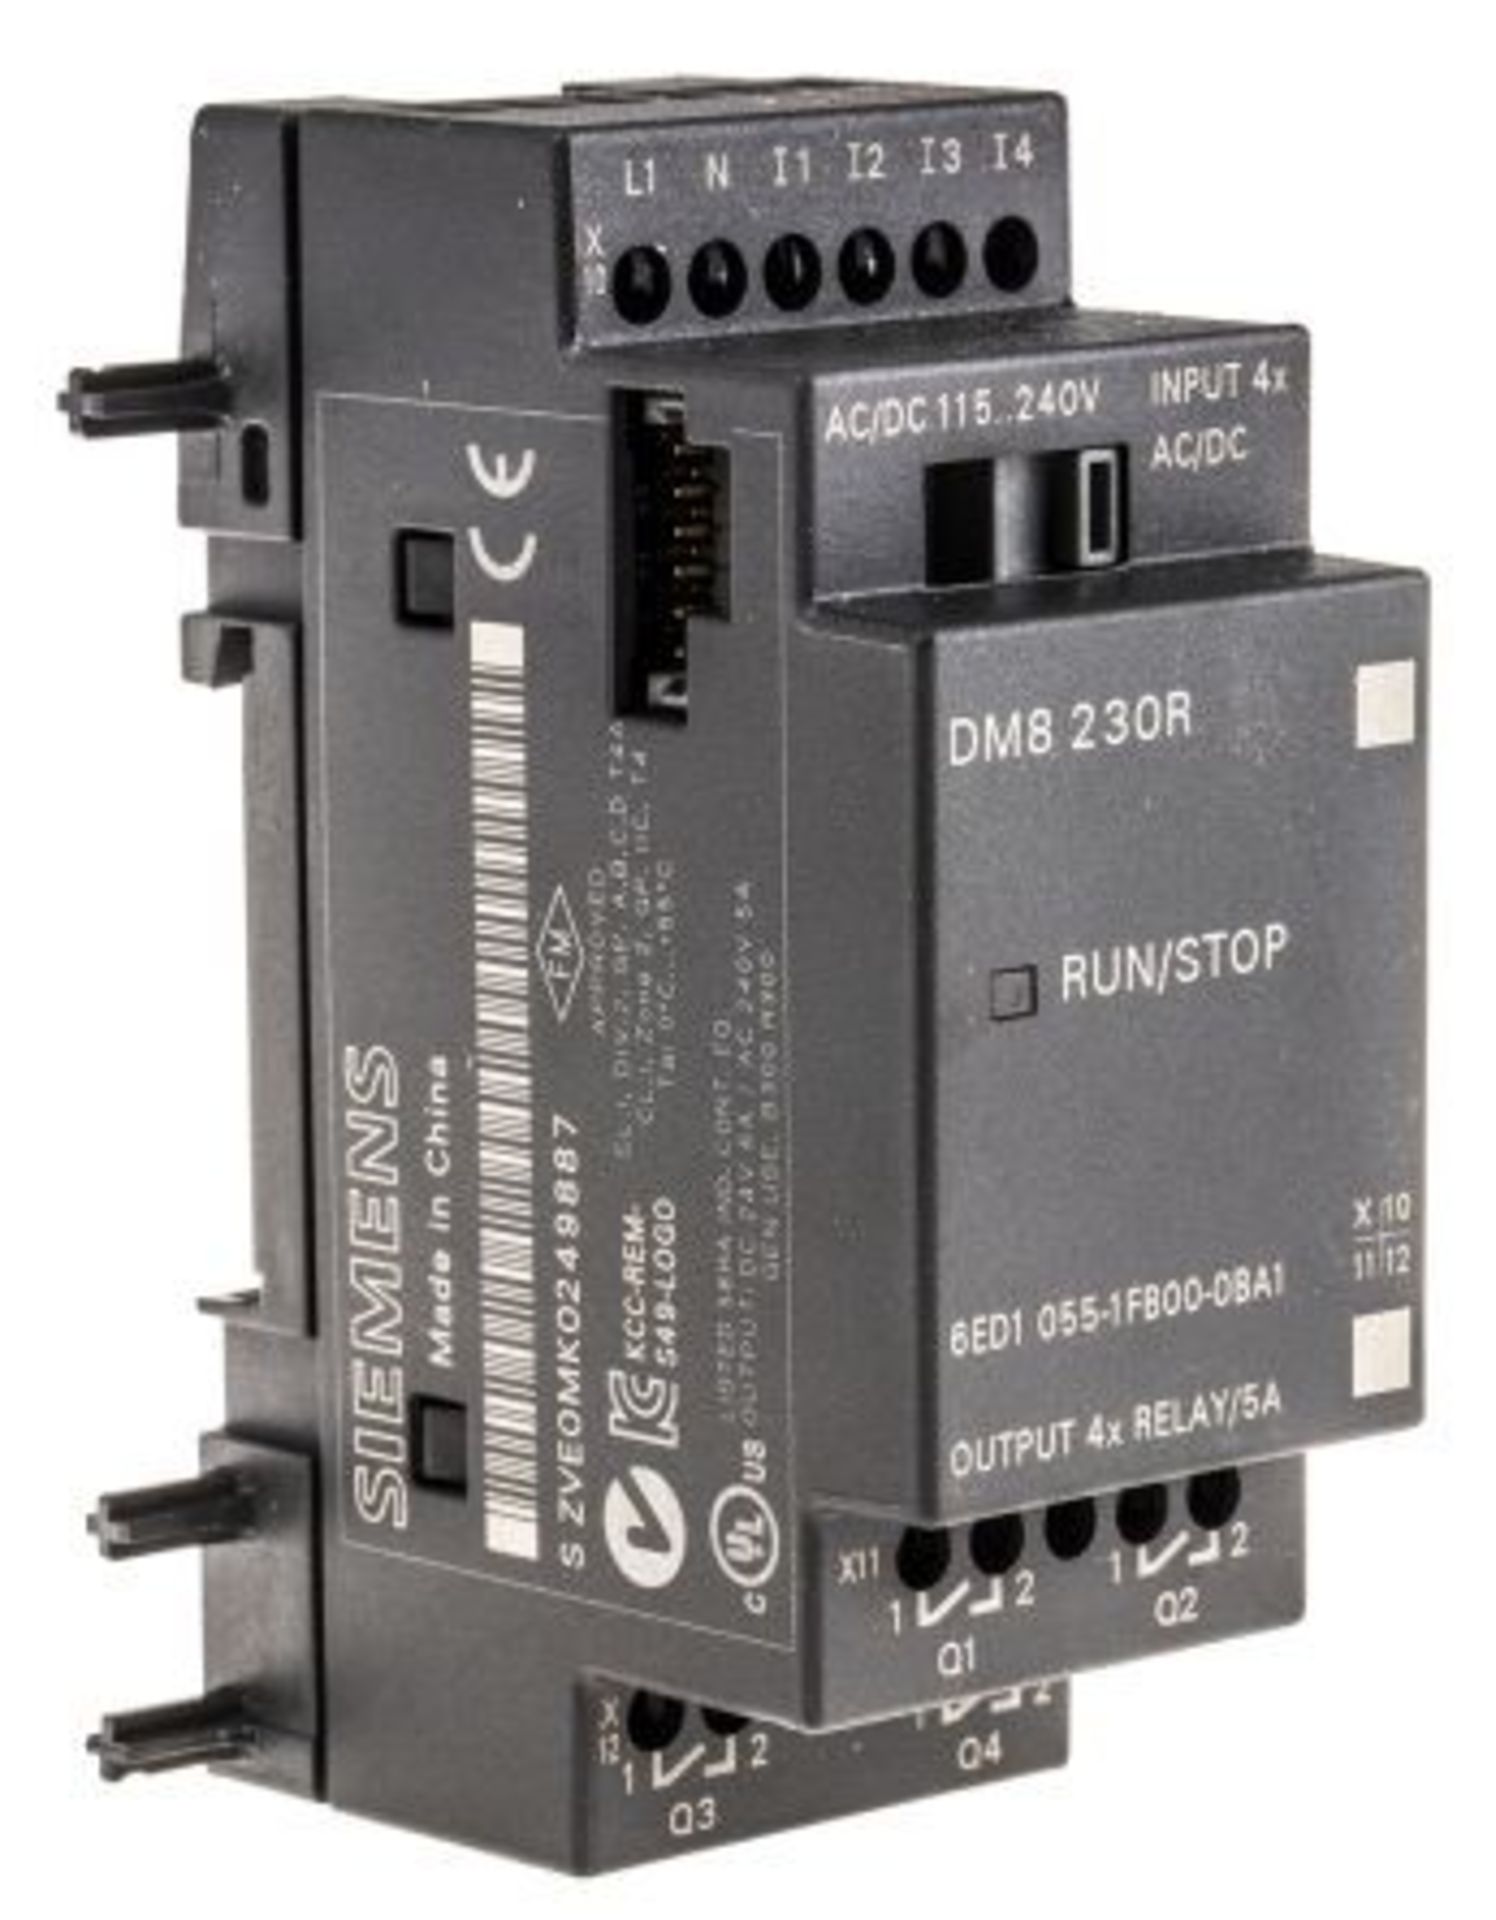 10 x Siemens LOGO! 8 Expansion Module, 100 → 240 V ac Relay, 4 x Input, 4 x Output Without Display